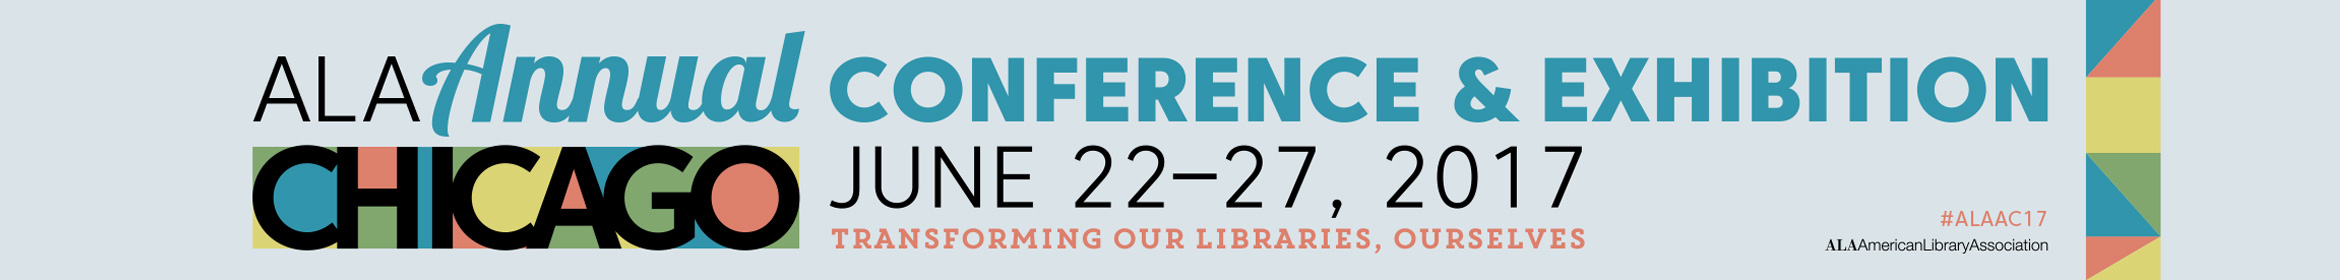 2017 ALA Annual Conference Main banner